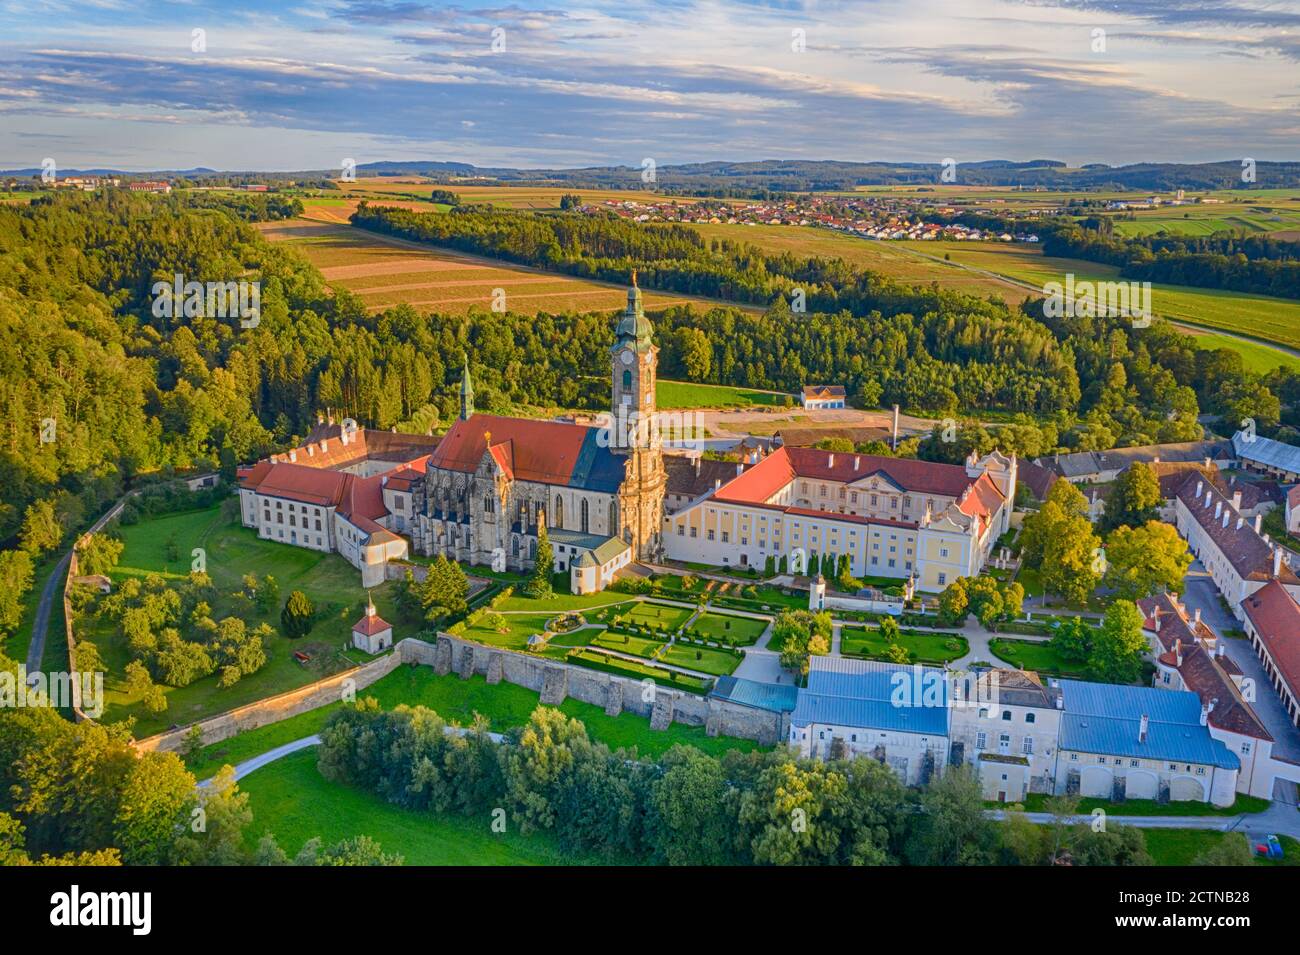 Stift Zwettl in the Waldviertel region, Lower Austria. Aerial view of the famous monastery during summer. Stock Photo